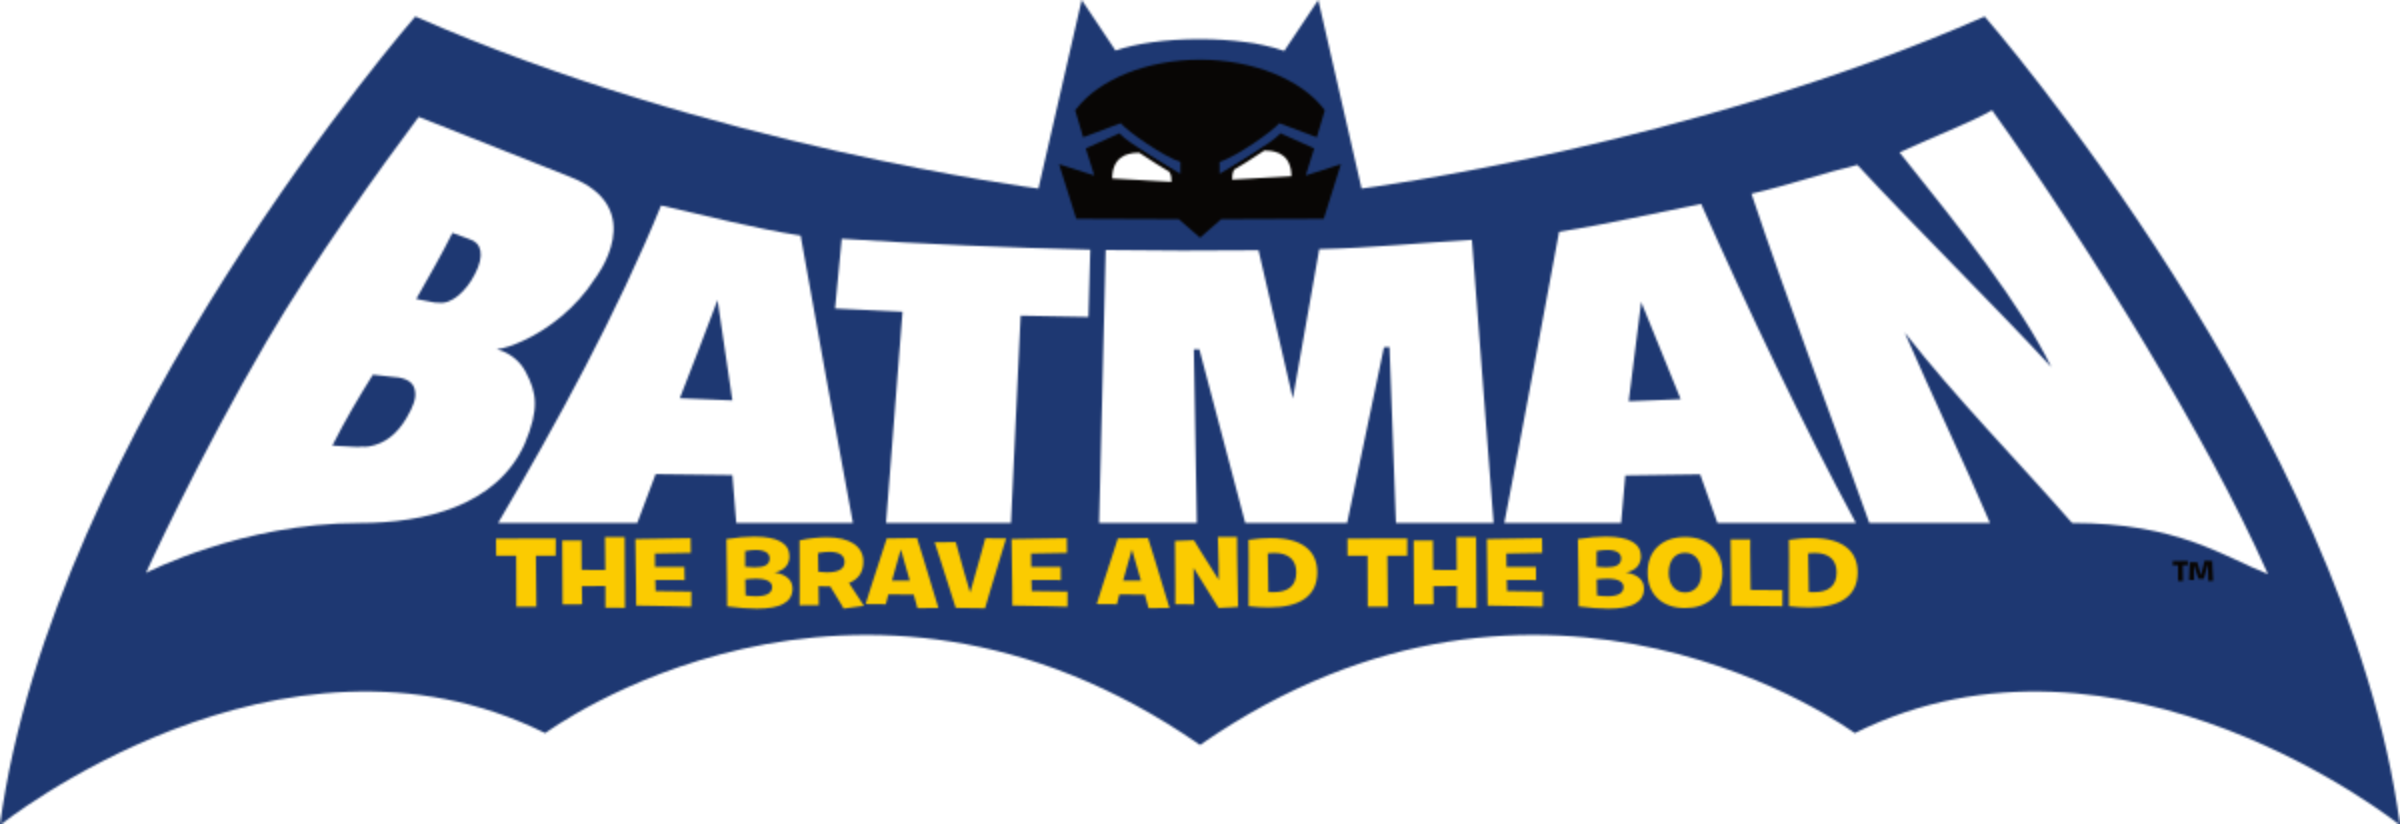 Batman: The Brave and the Bold (8 DVDs Box Set)